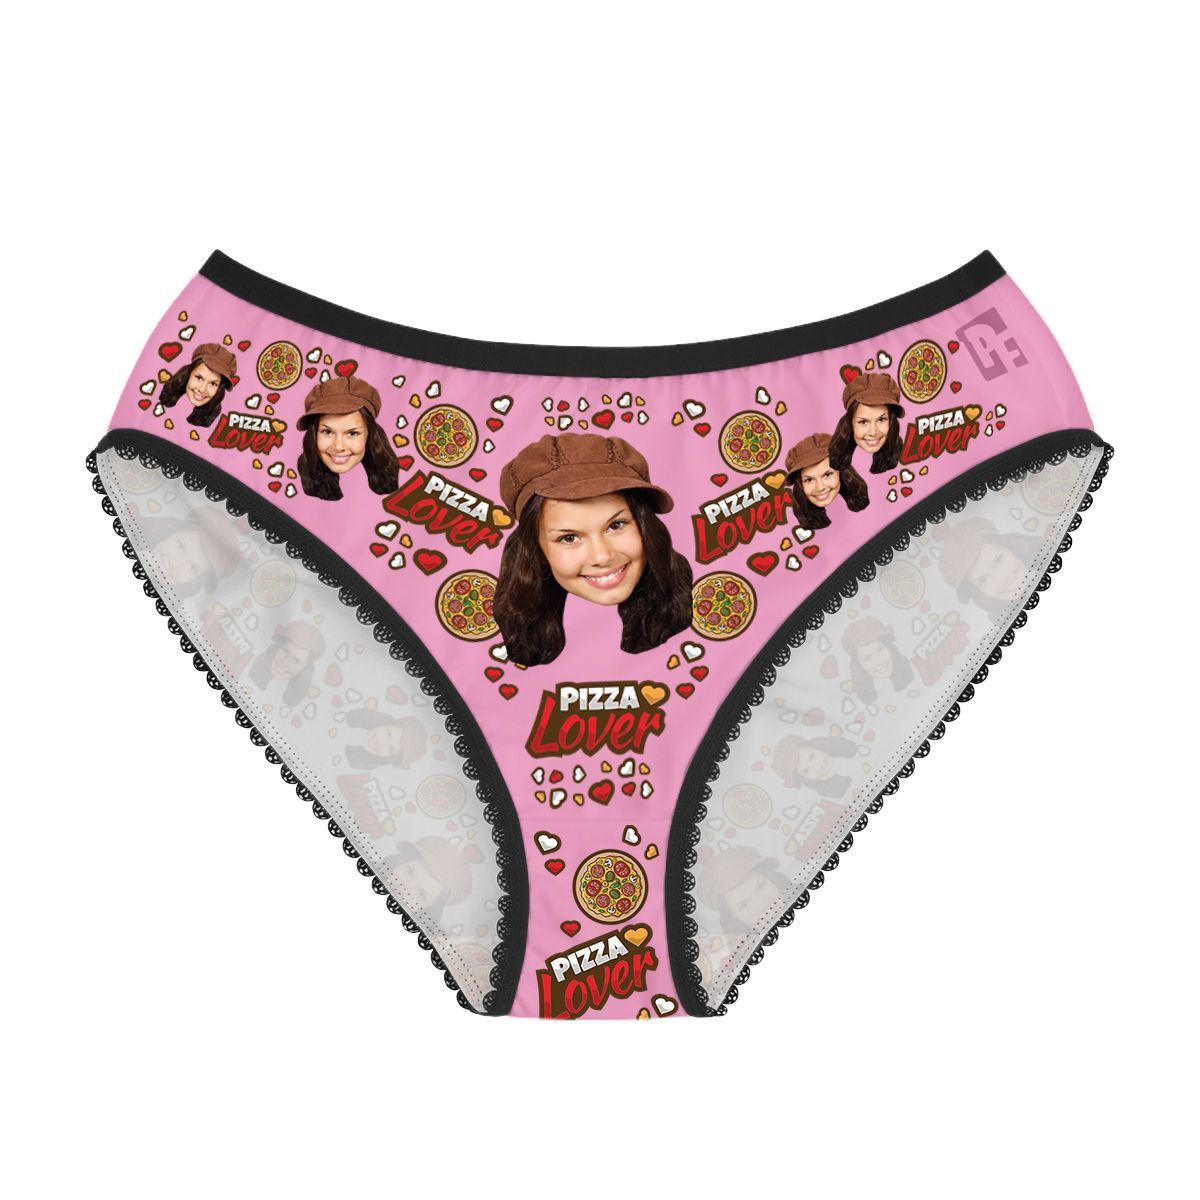 Pink Pizza Lover women's underwear briefs personalized with photo printed on them